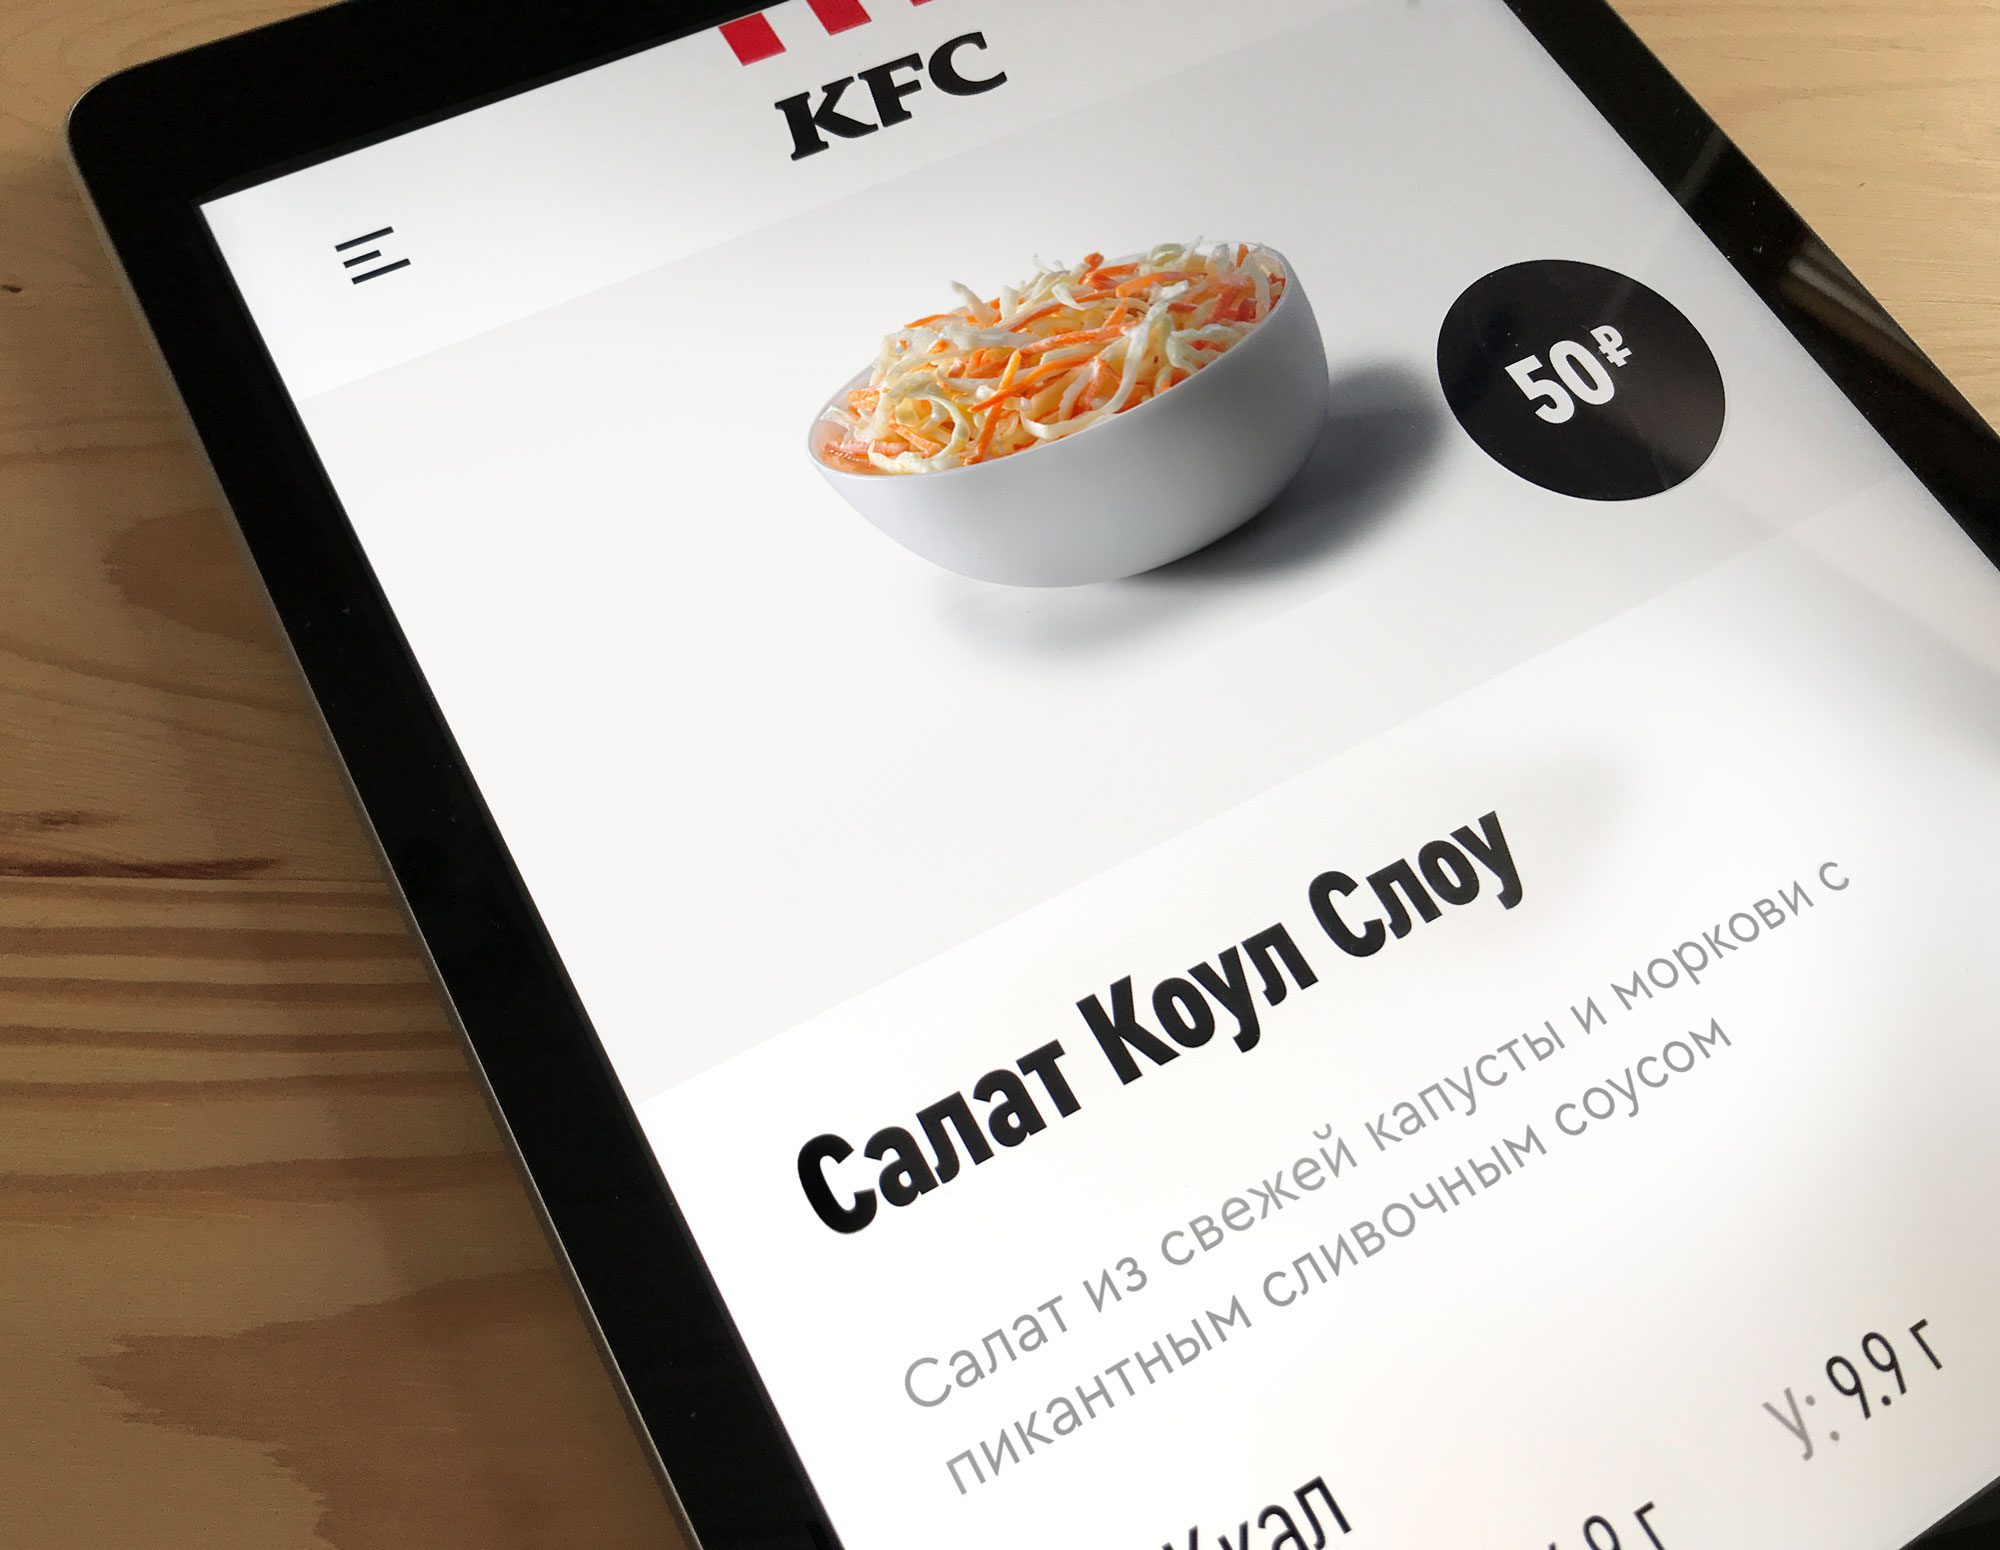 Download Kfc Russia Website 2019 Fonts In Use